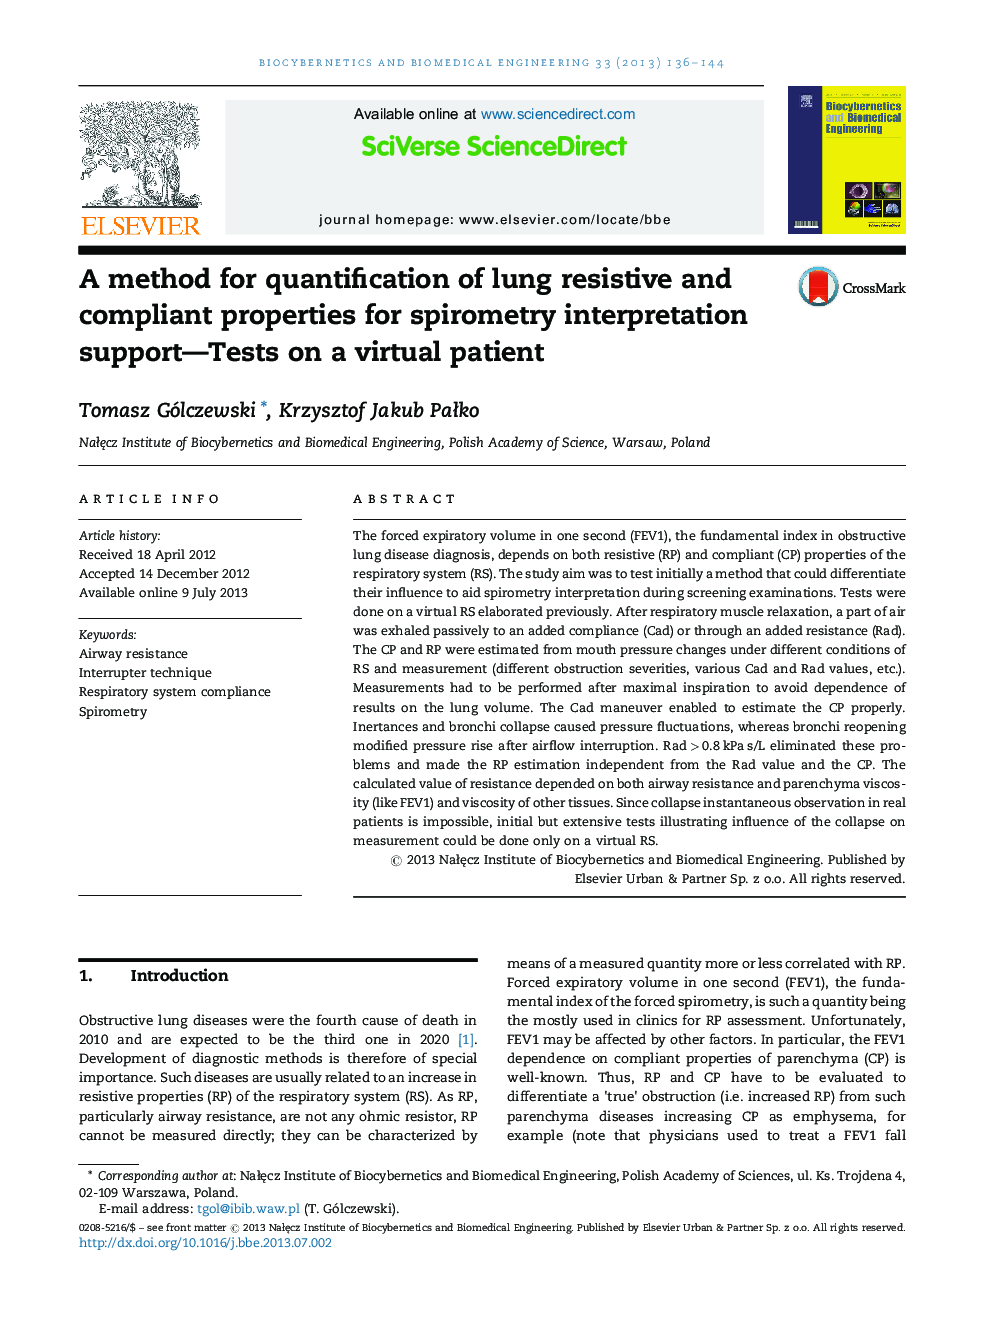 A method for quantification of lung resistive and compliant properties for spirometry interpretation support—Tests on a virtual patient